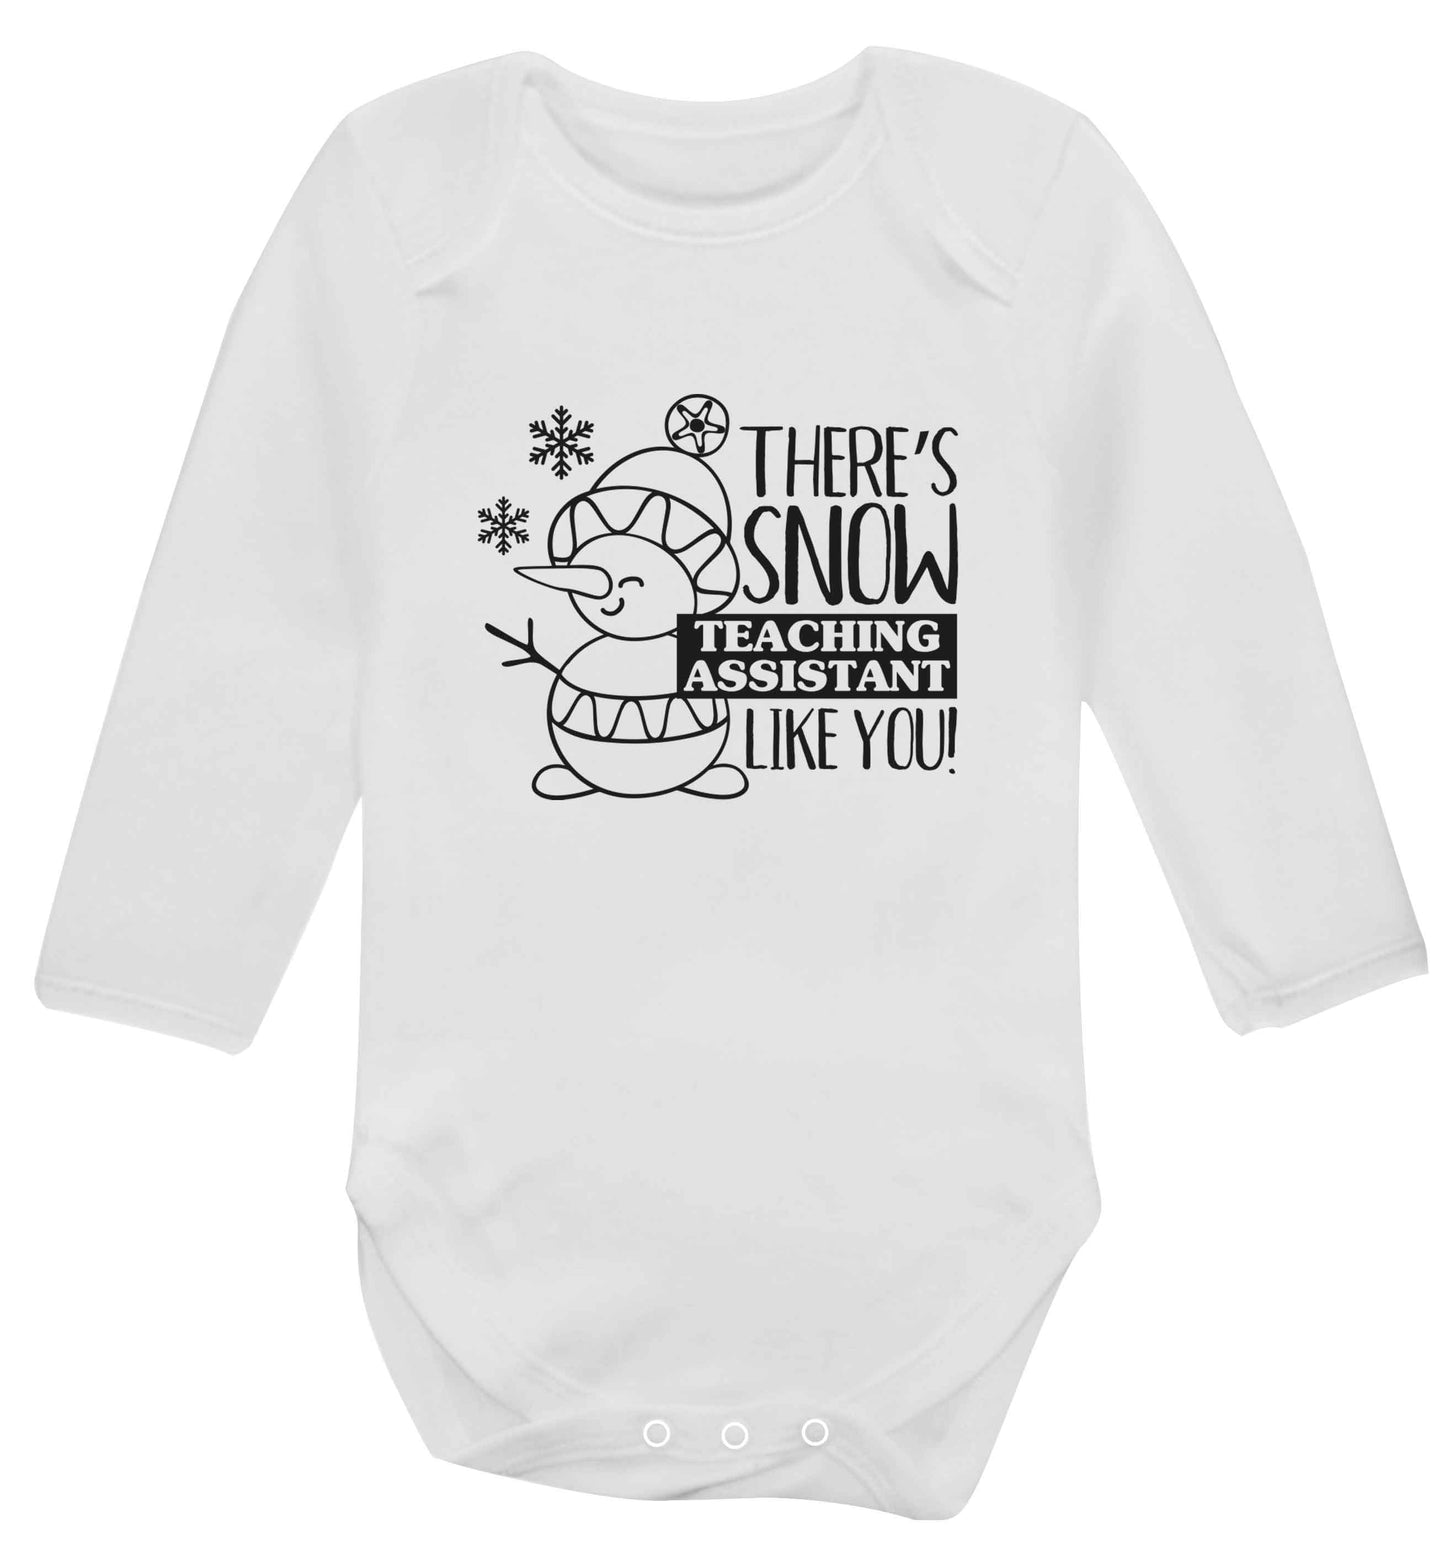 There's snow teaching assistant like you baby vest long sleeved white 6-12 months